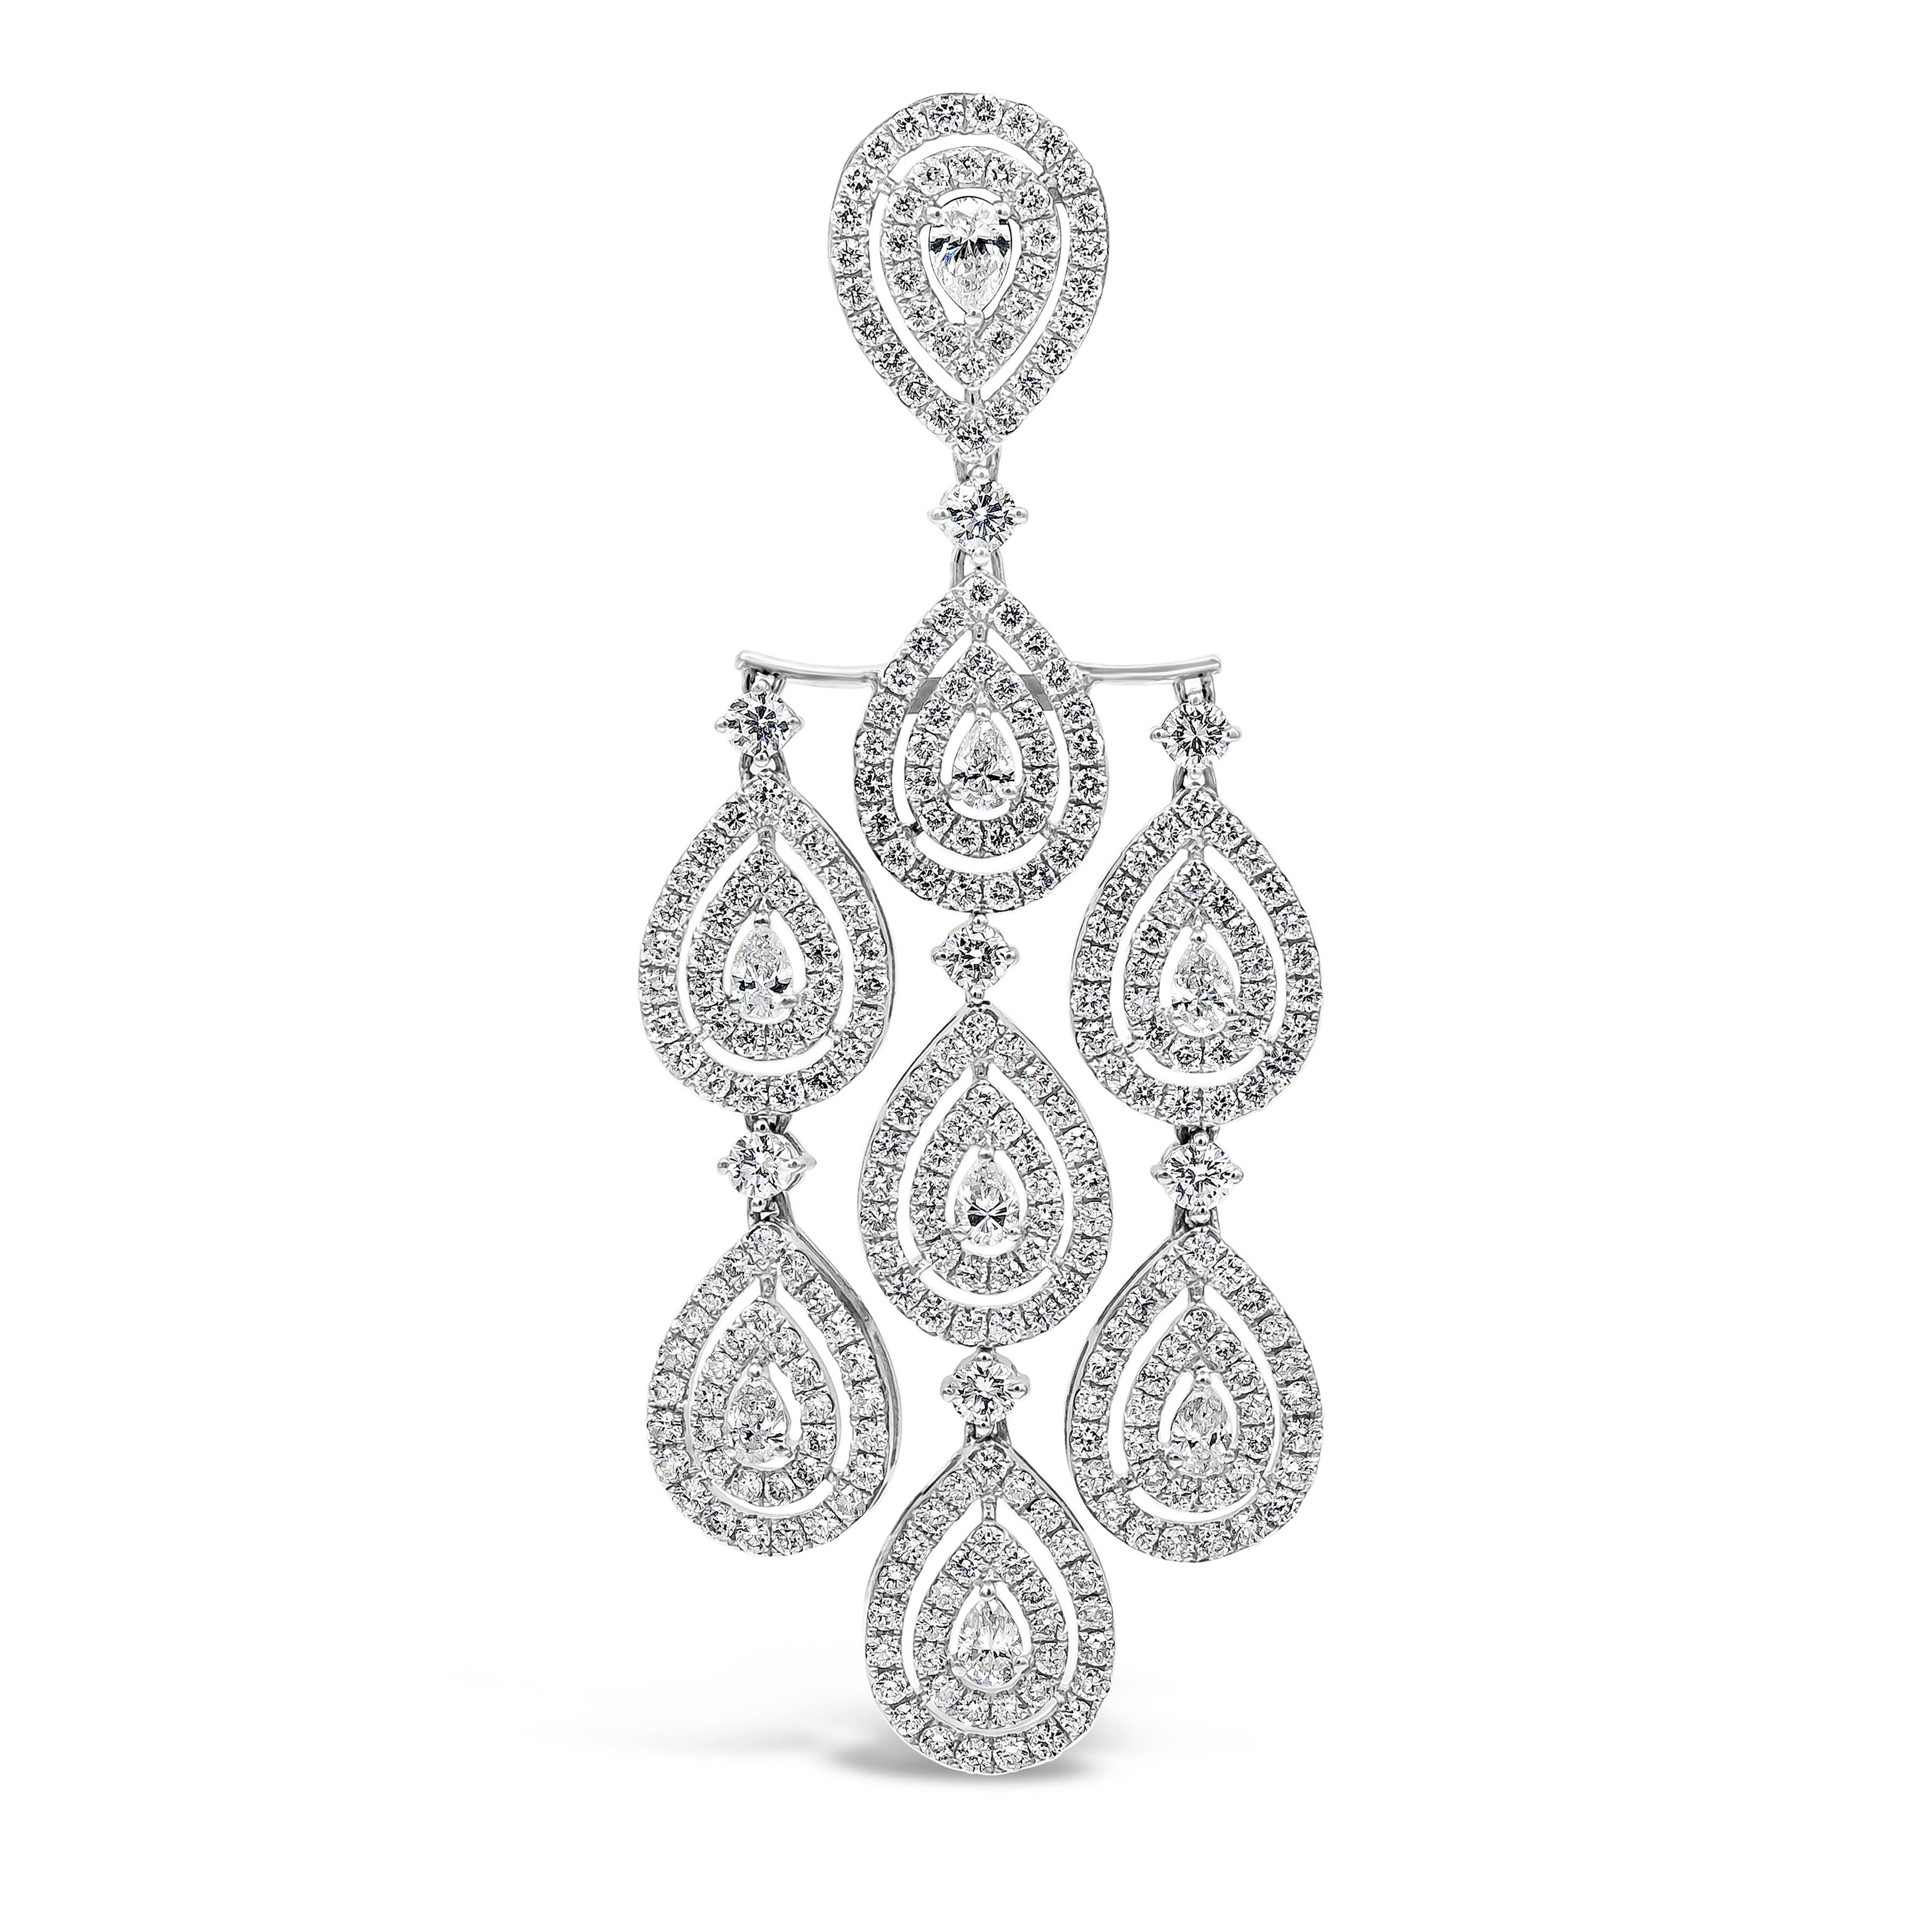 A brilliant pair of earrings showcasing pear shape diamonds, surrounded by two row of double halo round brilliant diamonds weighing 9.25 carats total. Set in a chandelier design and Finely made in 18k white gold.

Style available in different price